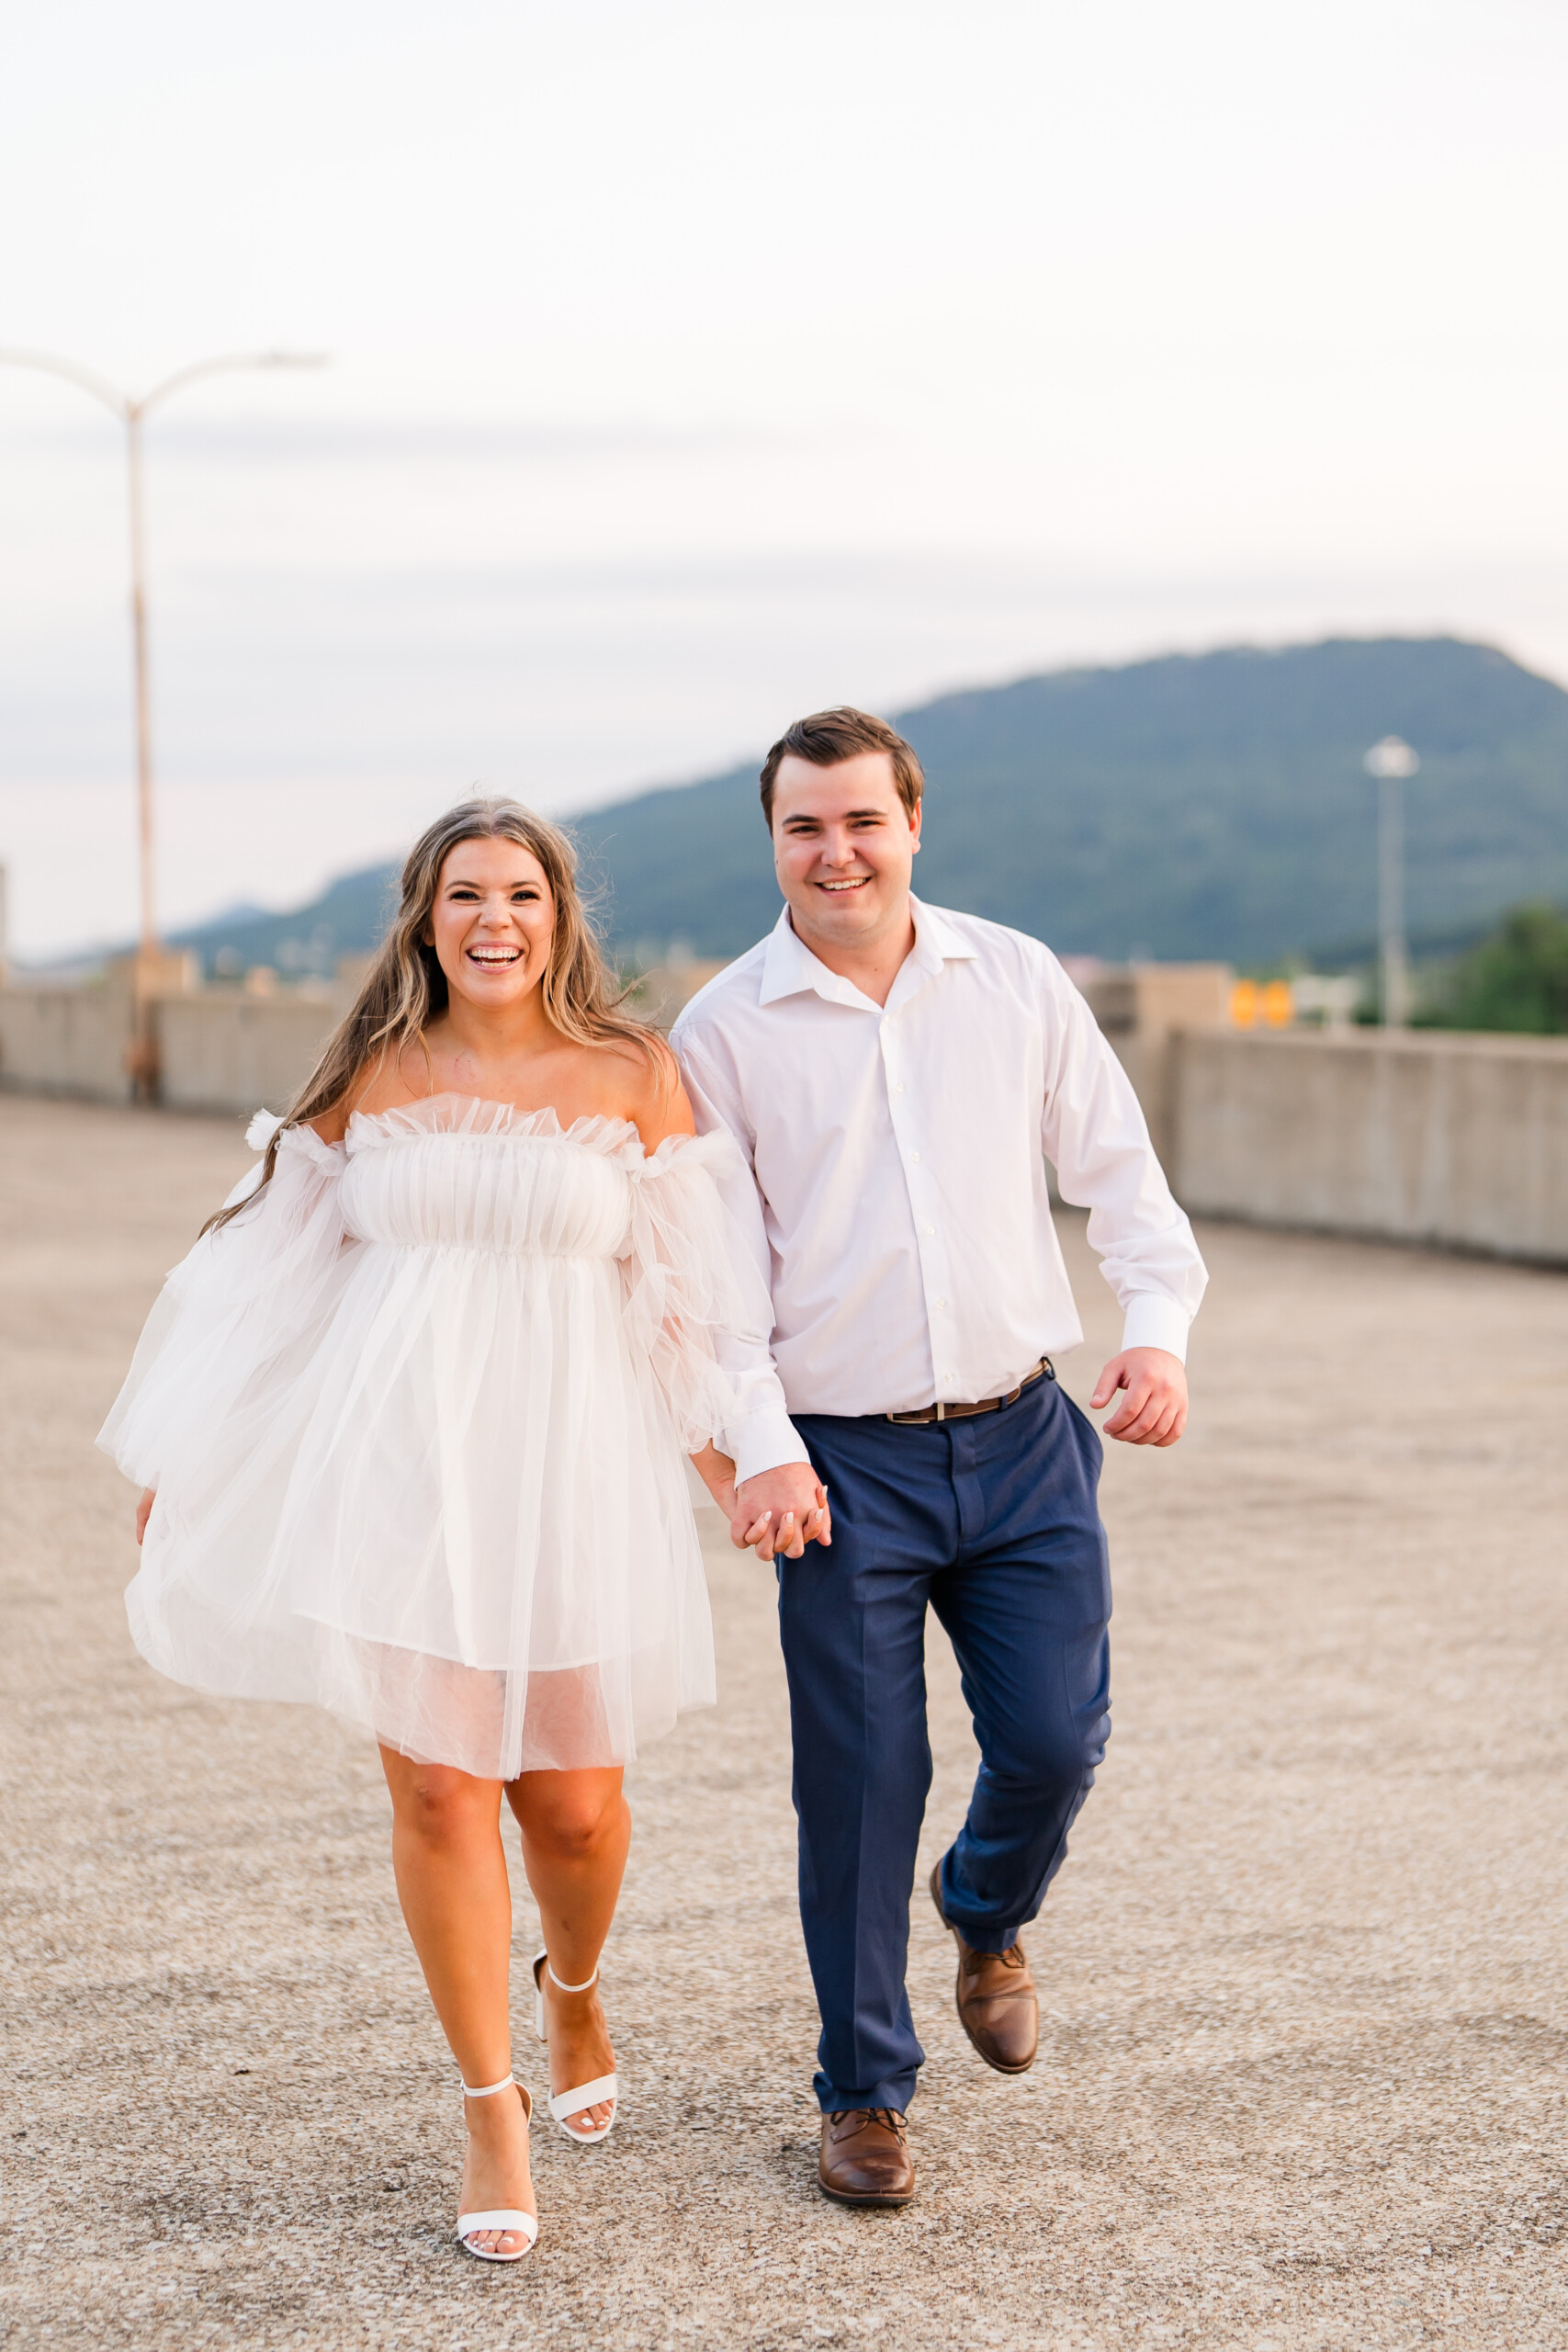 Downtown Chattanooga Happy Engaged Couple